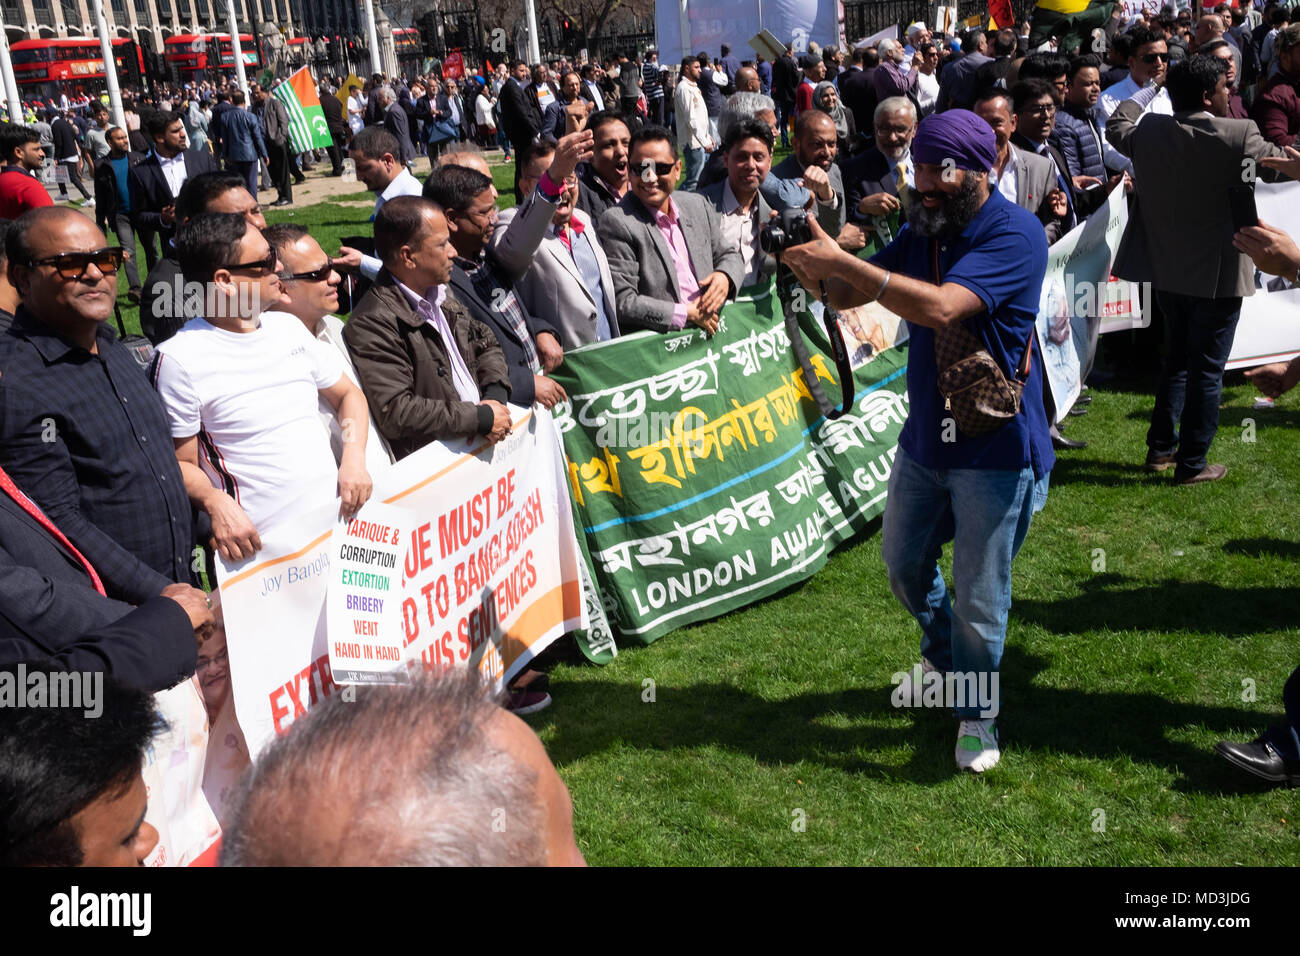 London, UK. 18th April 2018. London Protests: Hundreds of very loud protestors gathered in London's Parliament Square, outside the Houses of Parliament to greet the Indian Prime Minister Narendra Modi who is in London for the Commonwealth Heads of Government Meeting.  They are protes Credit: Tim Ring/Alamy Live News Stock Photo